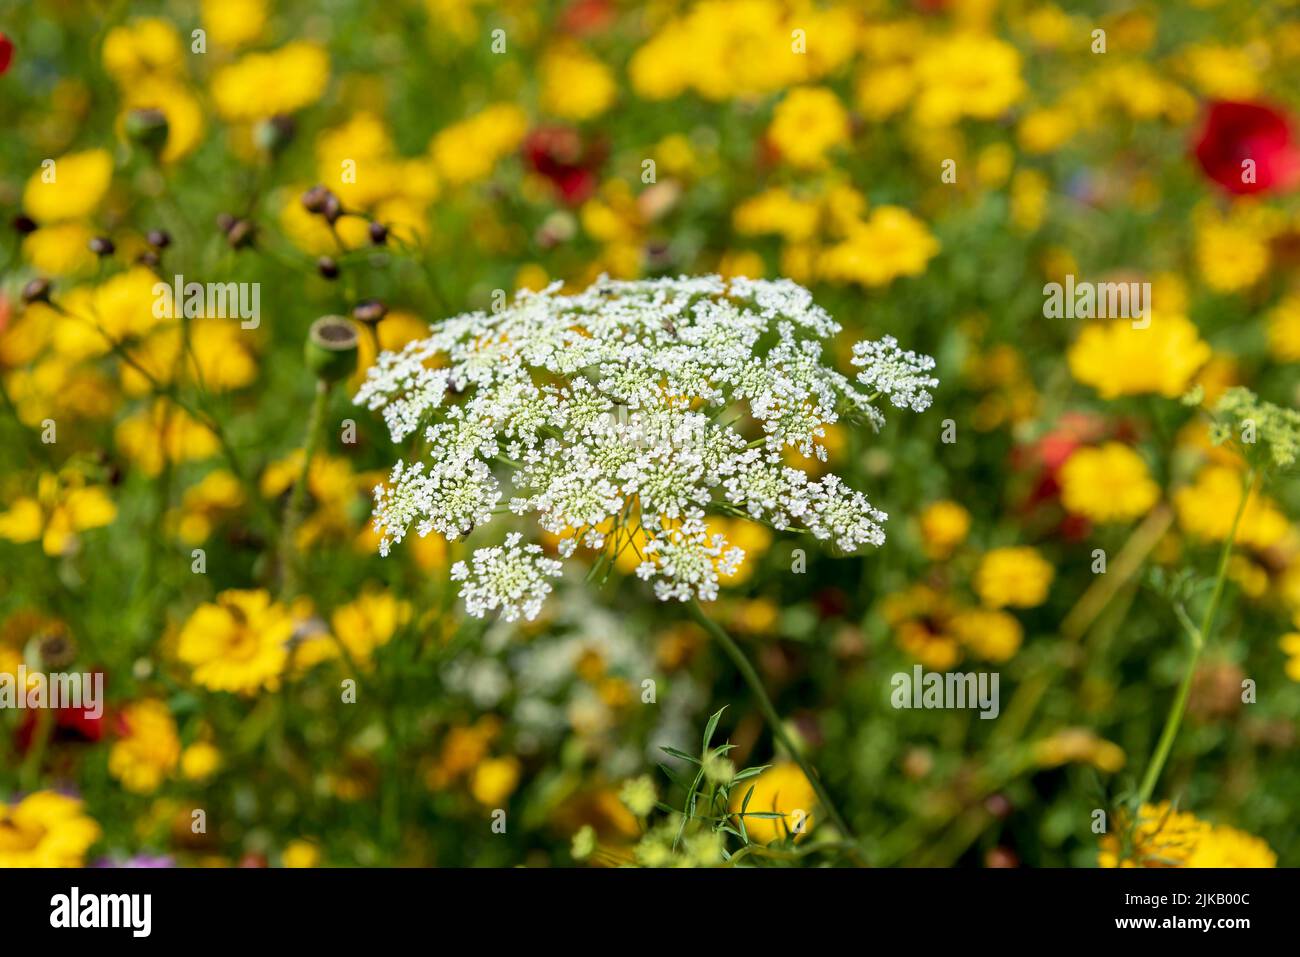 Wildflower meadow with cow parsley flower. Stock Photo